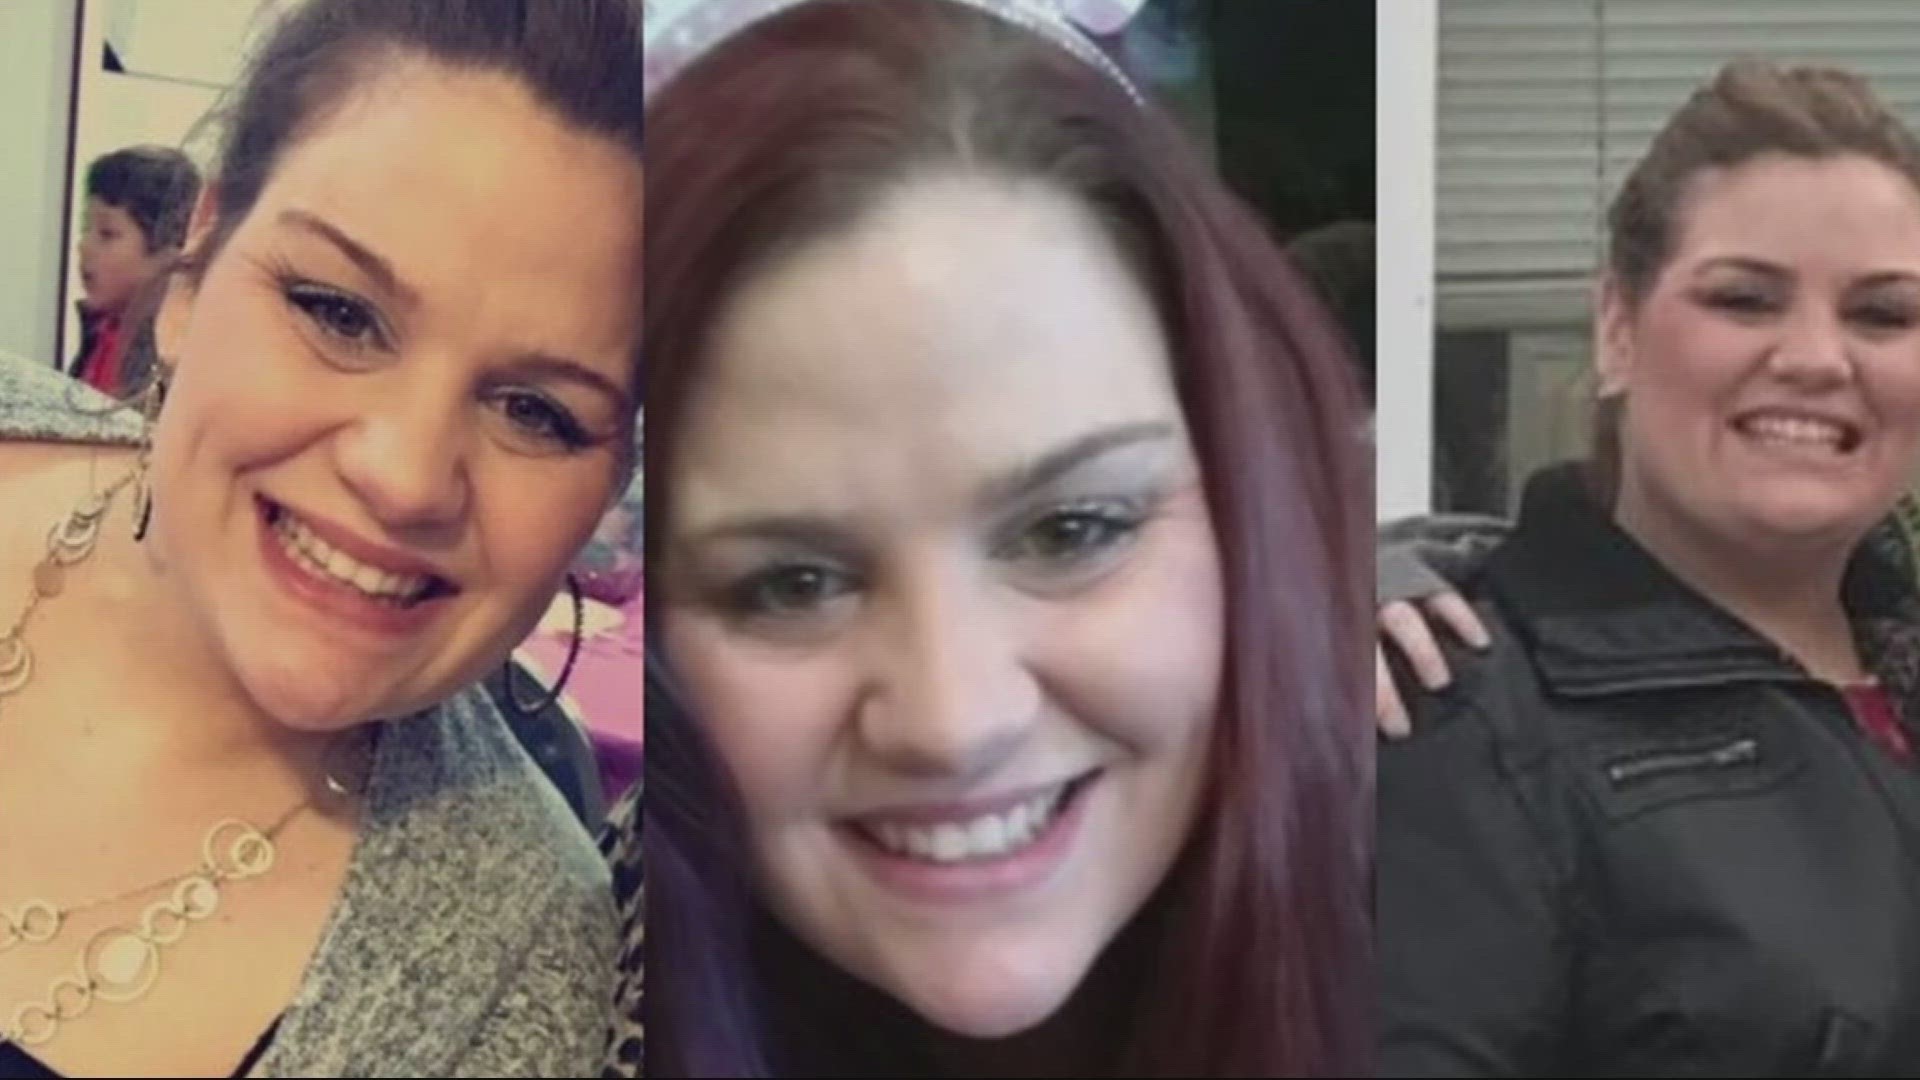 Investigators believe the deaths of Kristin Smith, Charity Perry, Ashley Real and Bridget Webster are linked to a Portland man. He’s being held in prison.